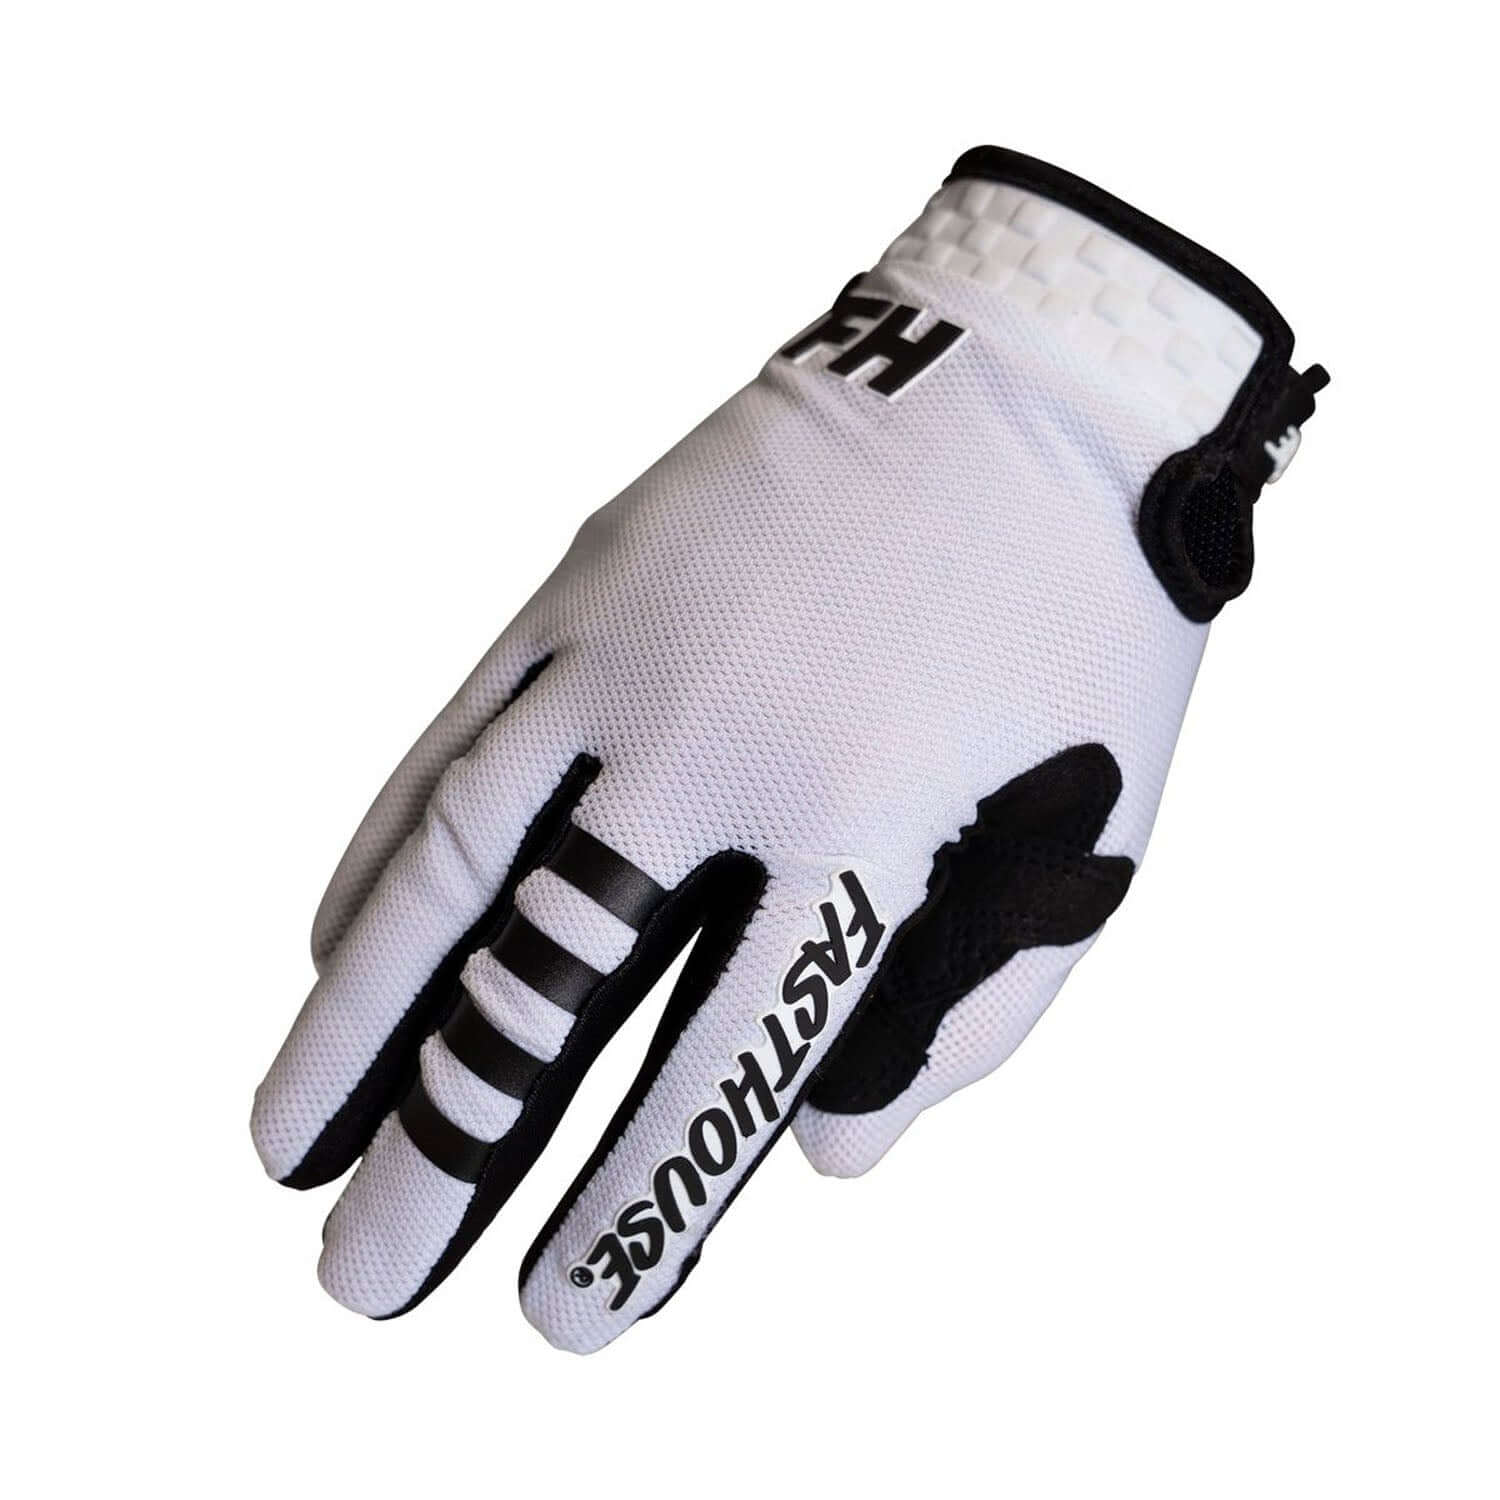 Fasthouse Youth A/C Elrod Air Gloves White Bike Gloves